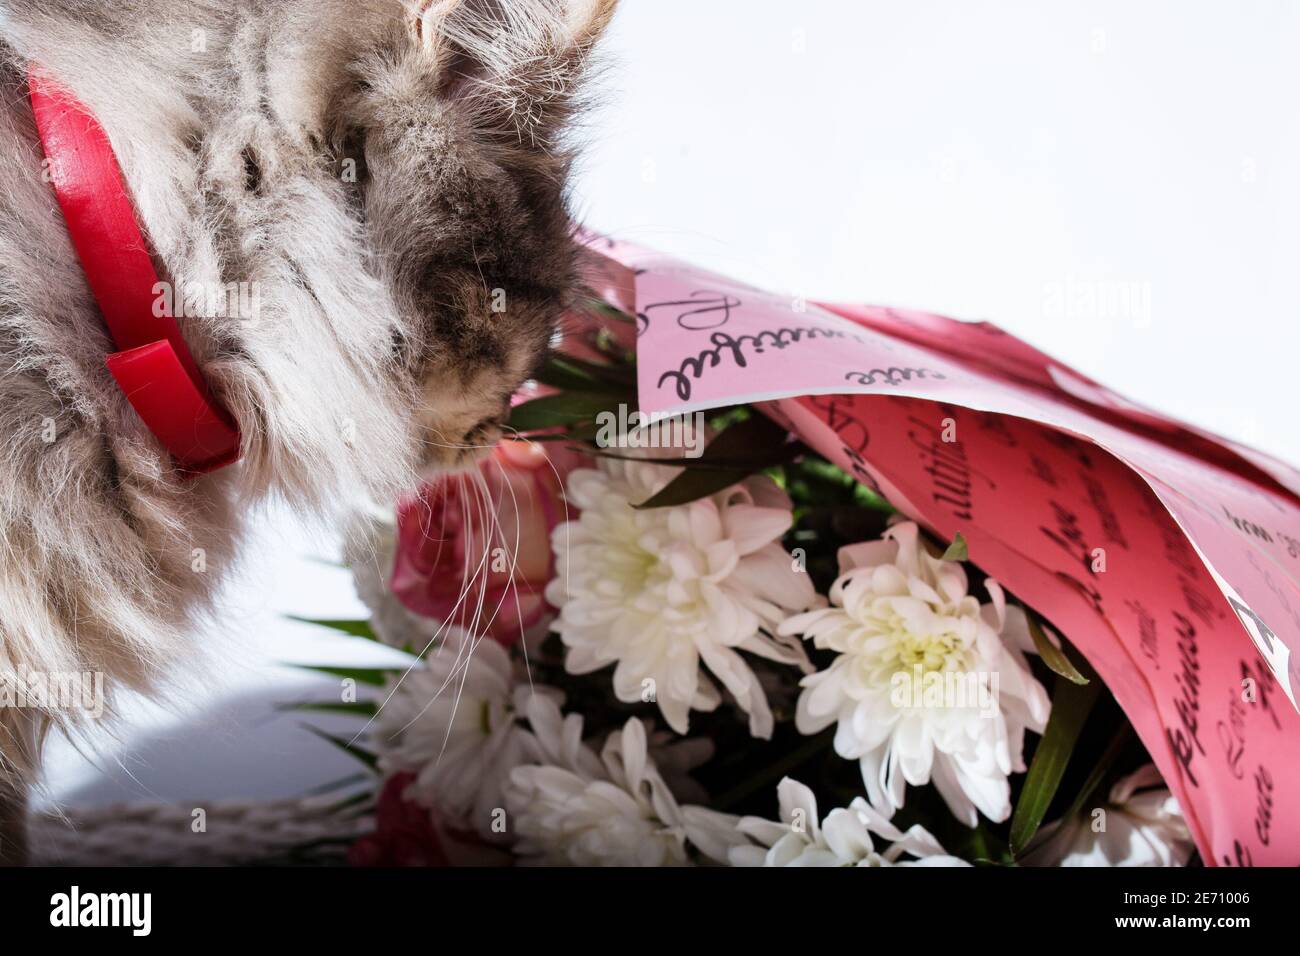 The cat sniffs a bouquet of flowers on a white background. Stock Photo